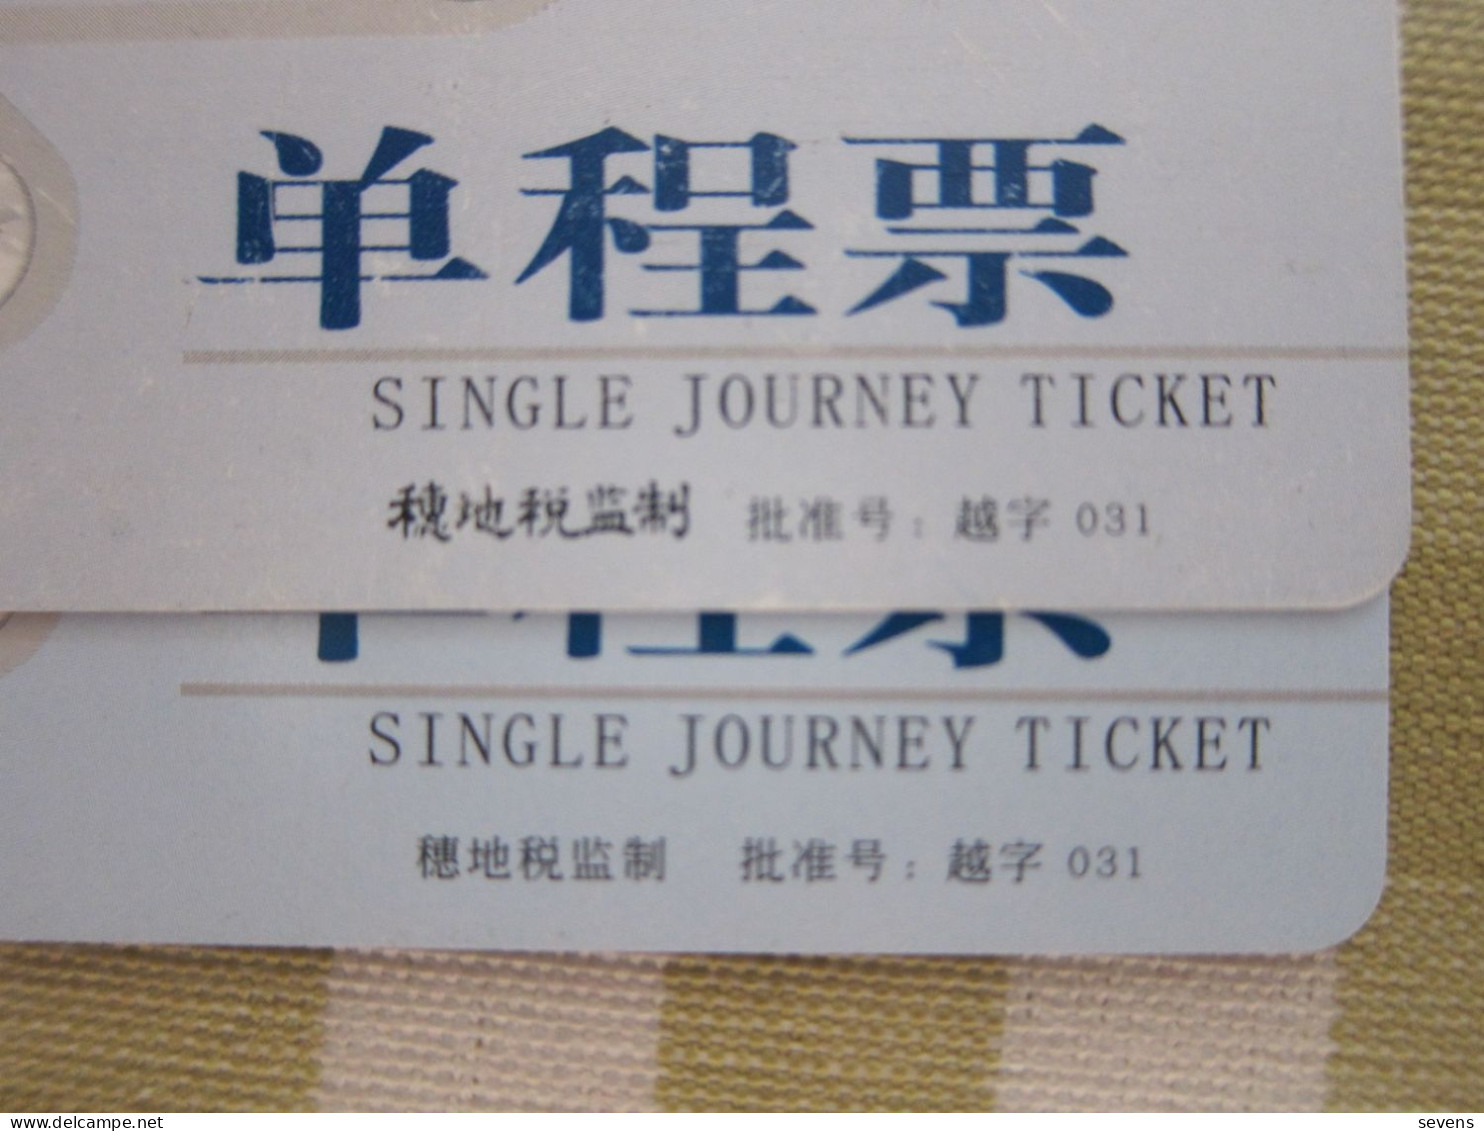 Guangzhou Metro Ticket Card, Siemens-Hearing, Shell,two Different Printed Character Of Some Text, One Card With Scratchs - Non Classificati